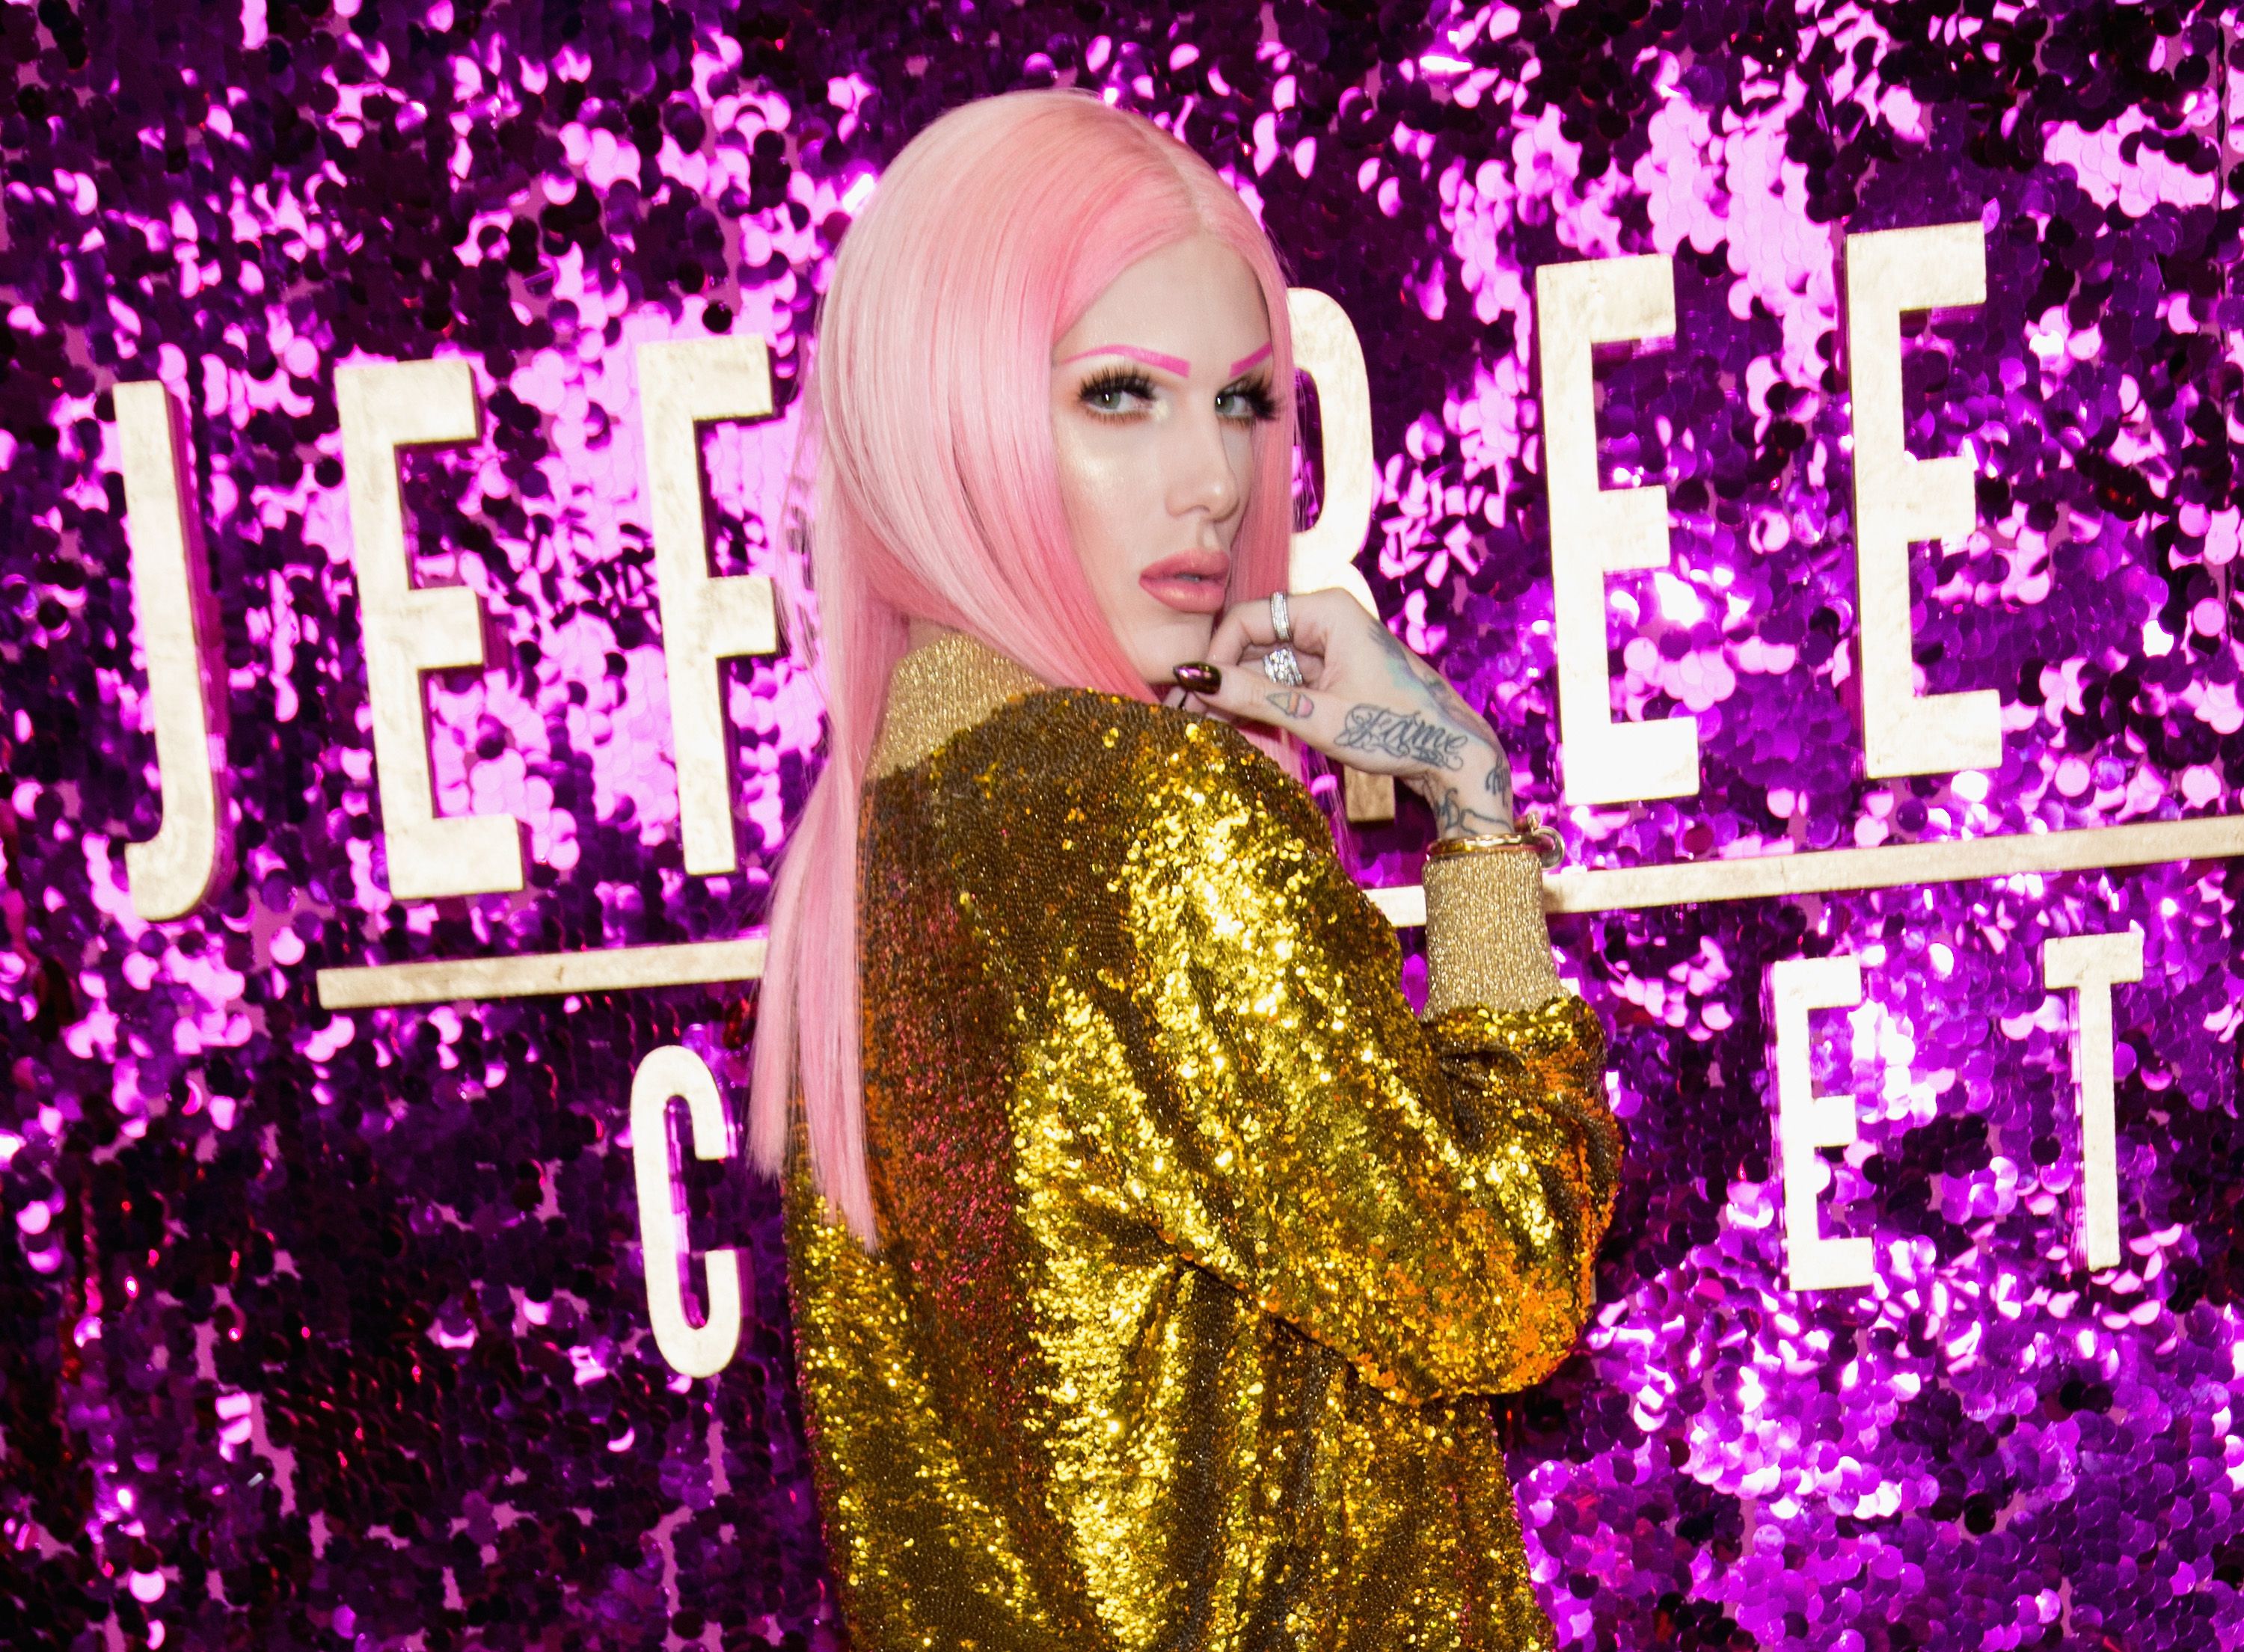 How Jeffree Star Cosmetics used predictive modeling in its